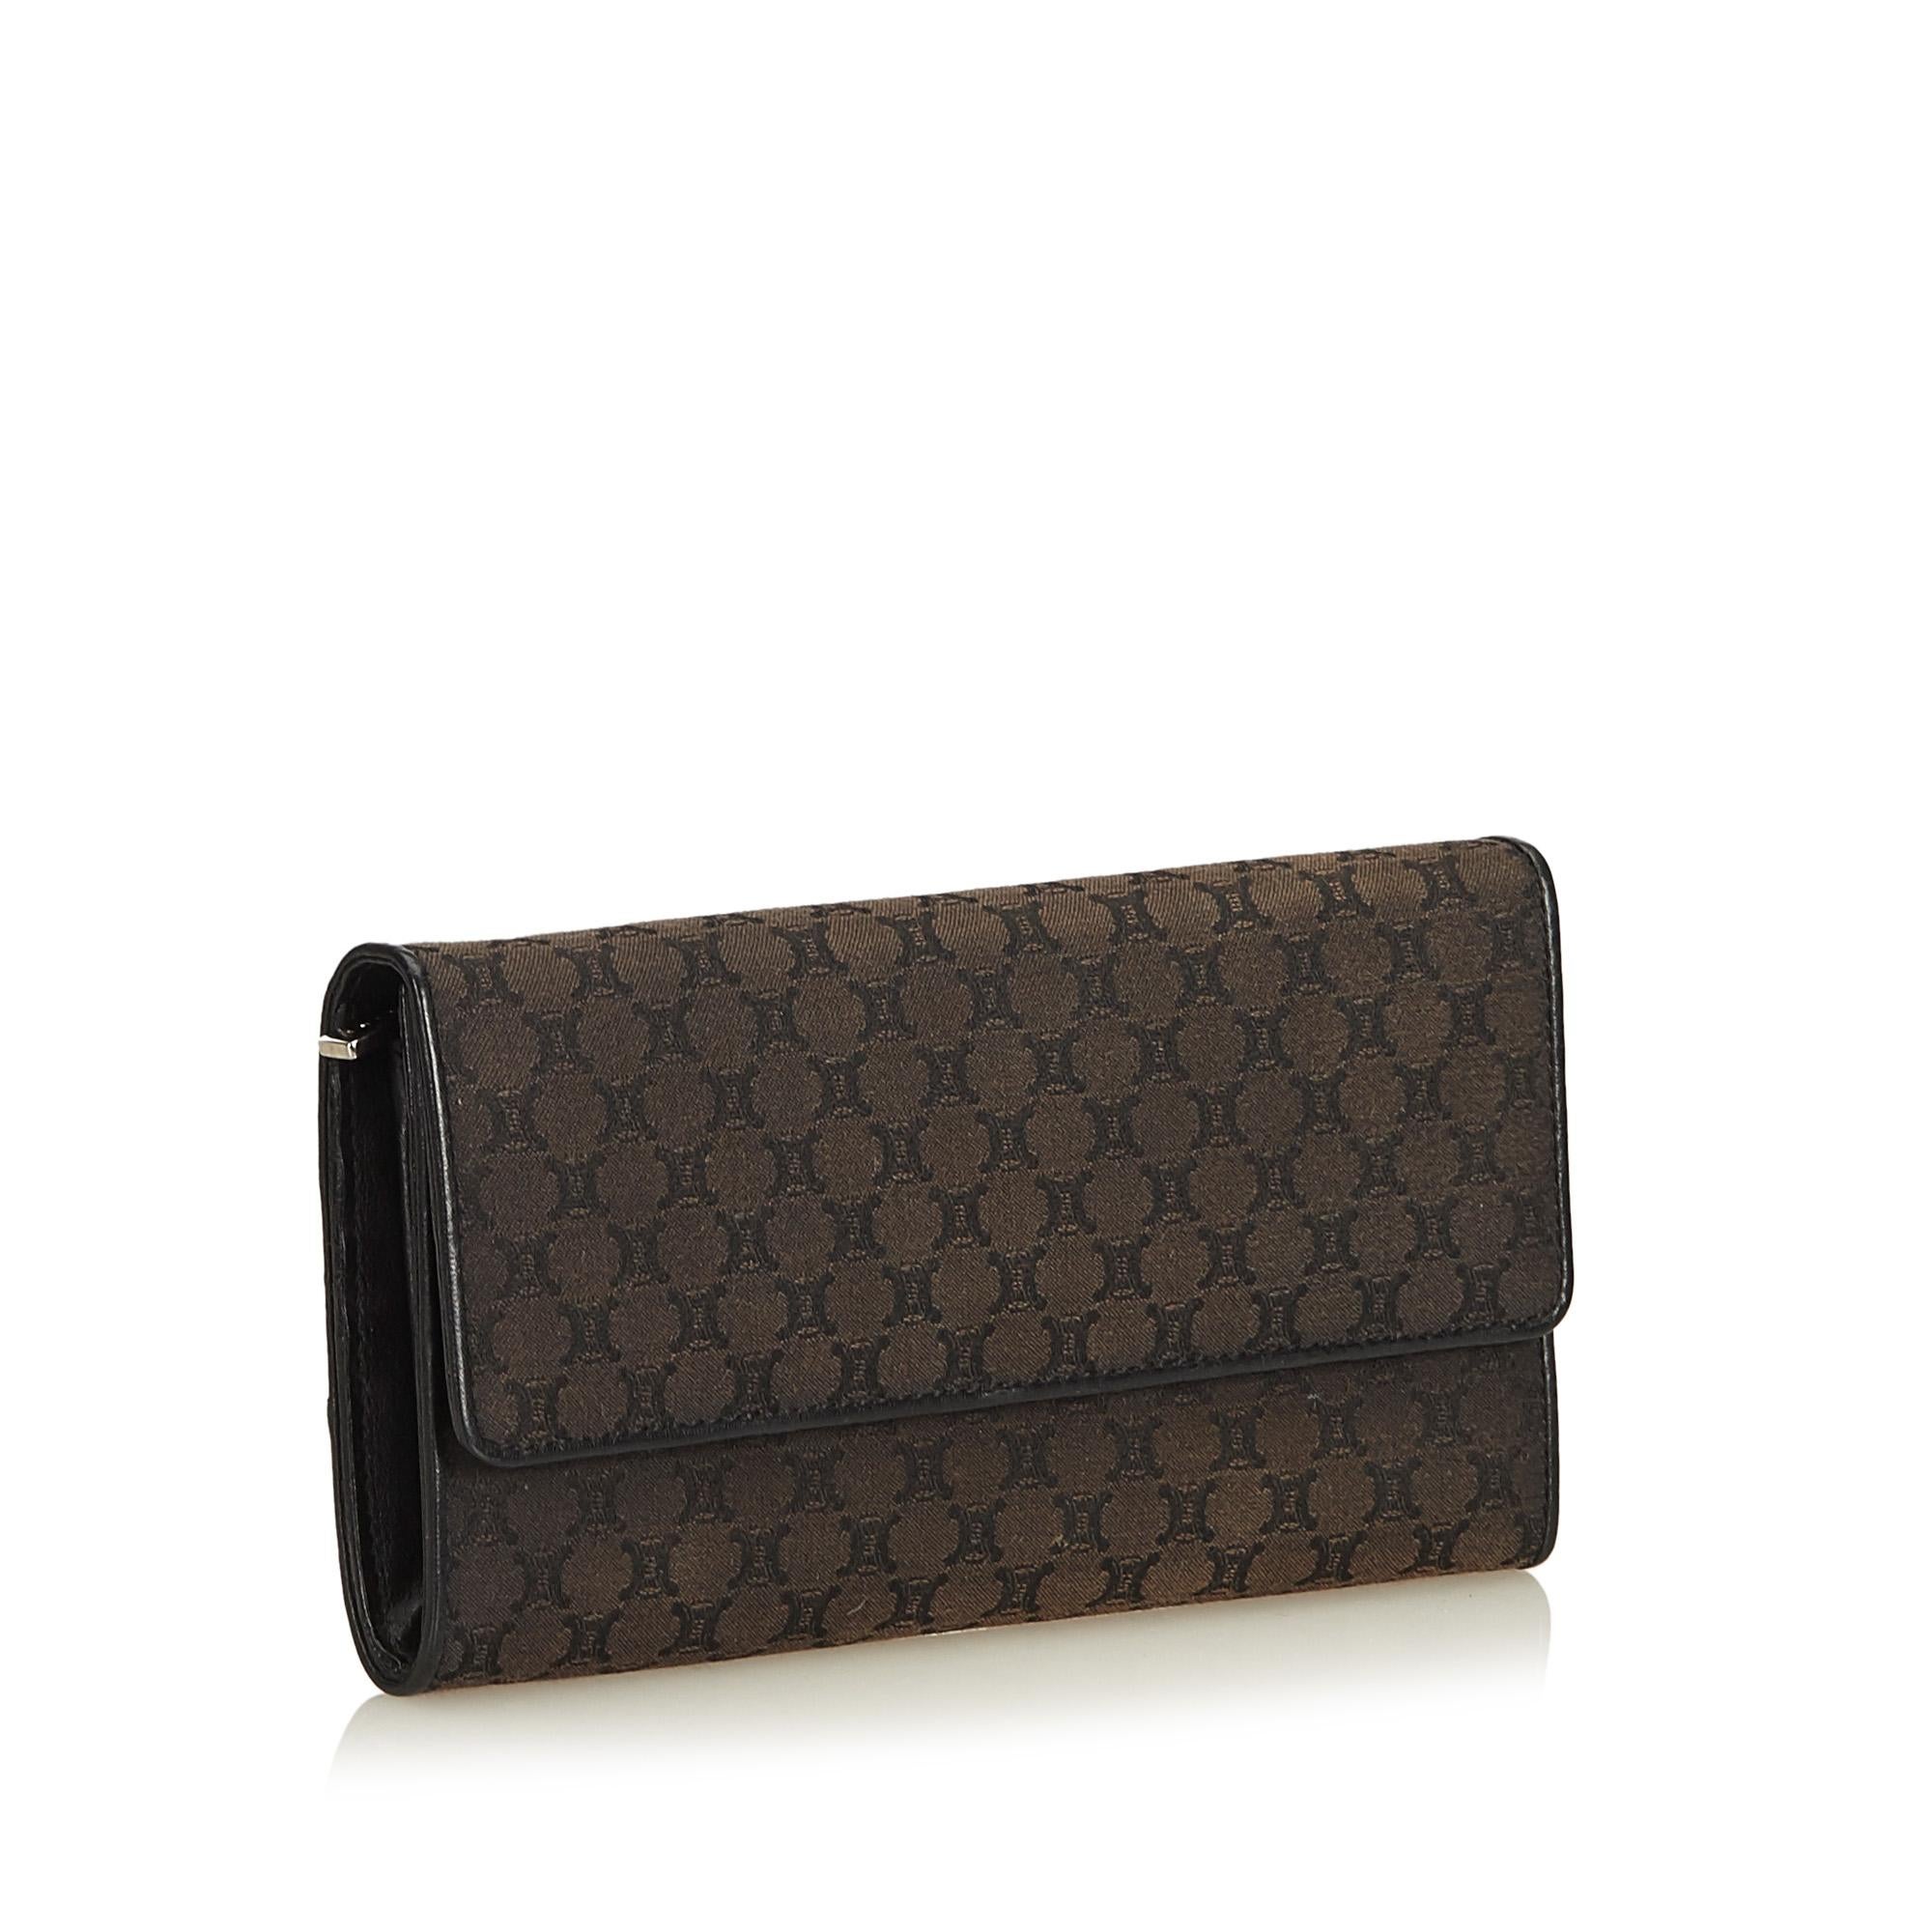 This long wallet features a jacquard body with leather trim, front flap with button clasp closure, and interior zip and slip pockets. It carries as AB condition rating.

Inclusions: 
Dust Bag
Box

Dimensions:
Length: 10.00 cm
Width: 19.00 cm
Depth: